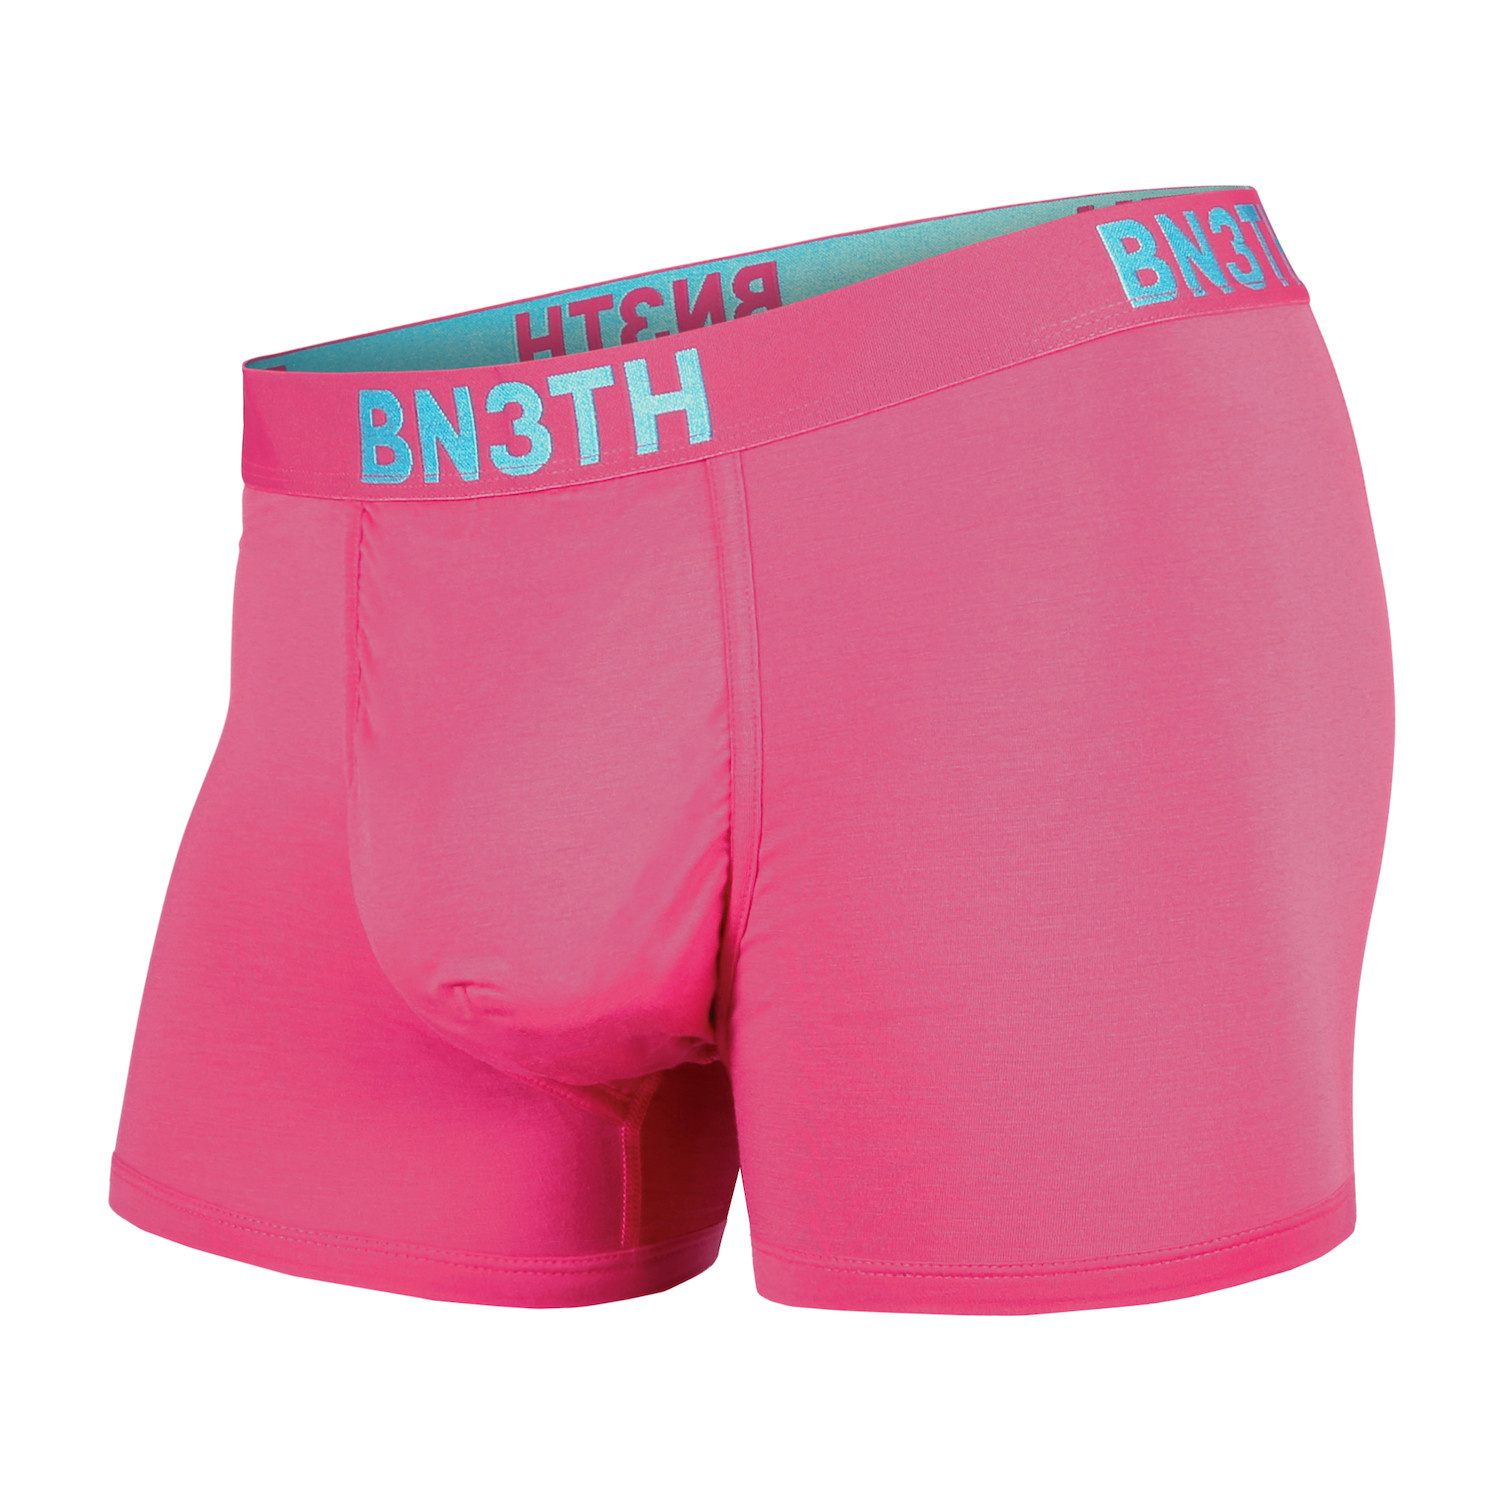 BN3TH Classic Trunk Boxer - Monashee Outdoors